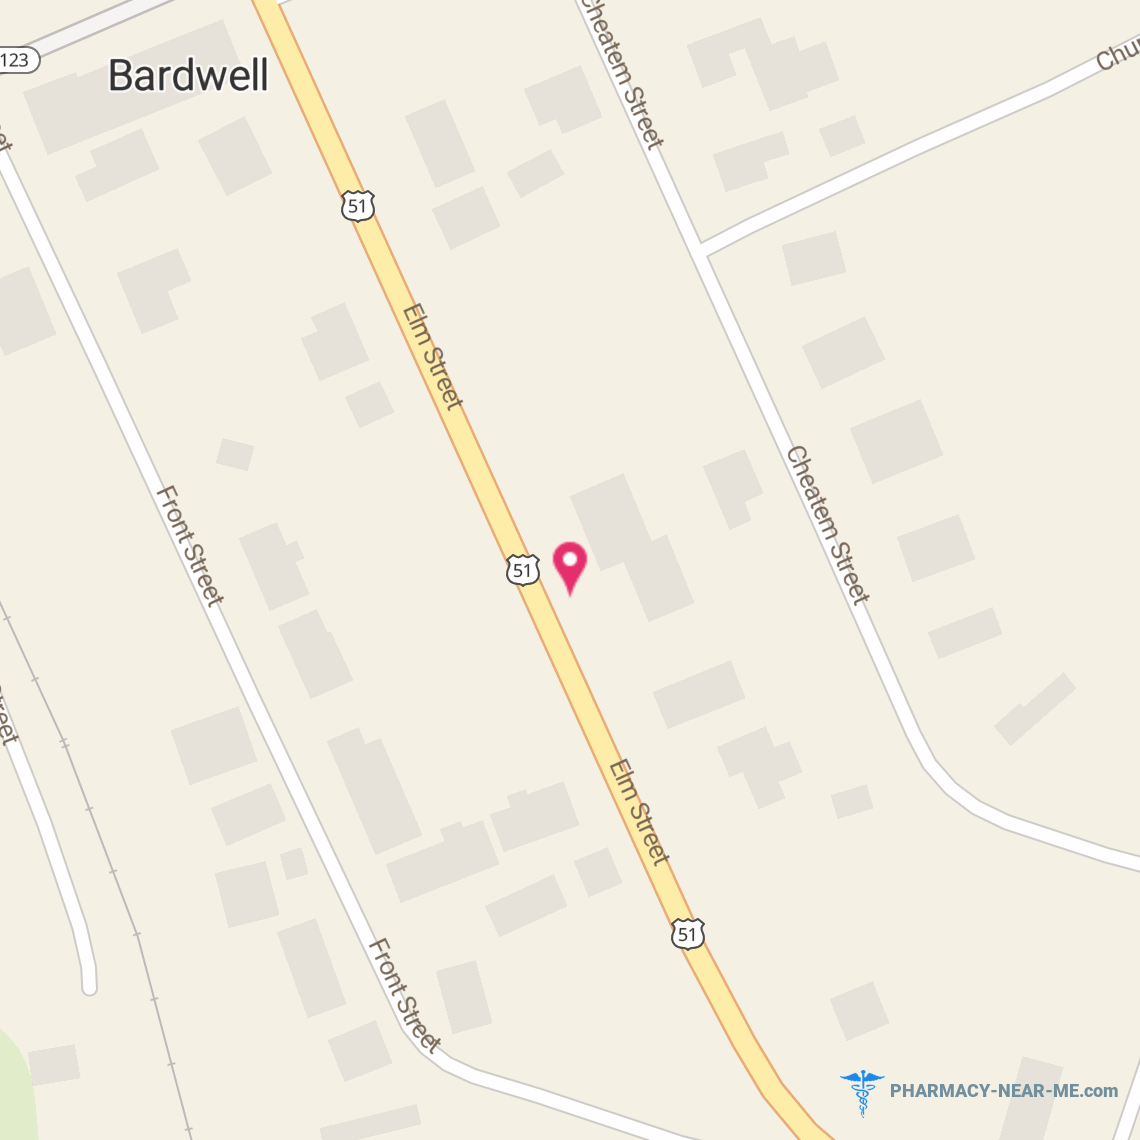 BARDWELL PHARMACY - Pharmacy Hours, Phone, Reviews & Information: 178 US Highway 51 N, Bardwell, Kentucky 42023, United States